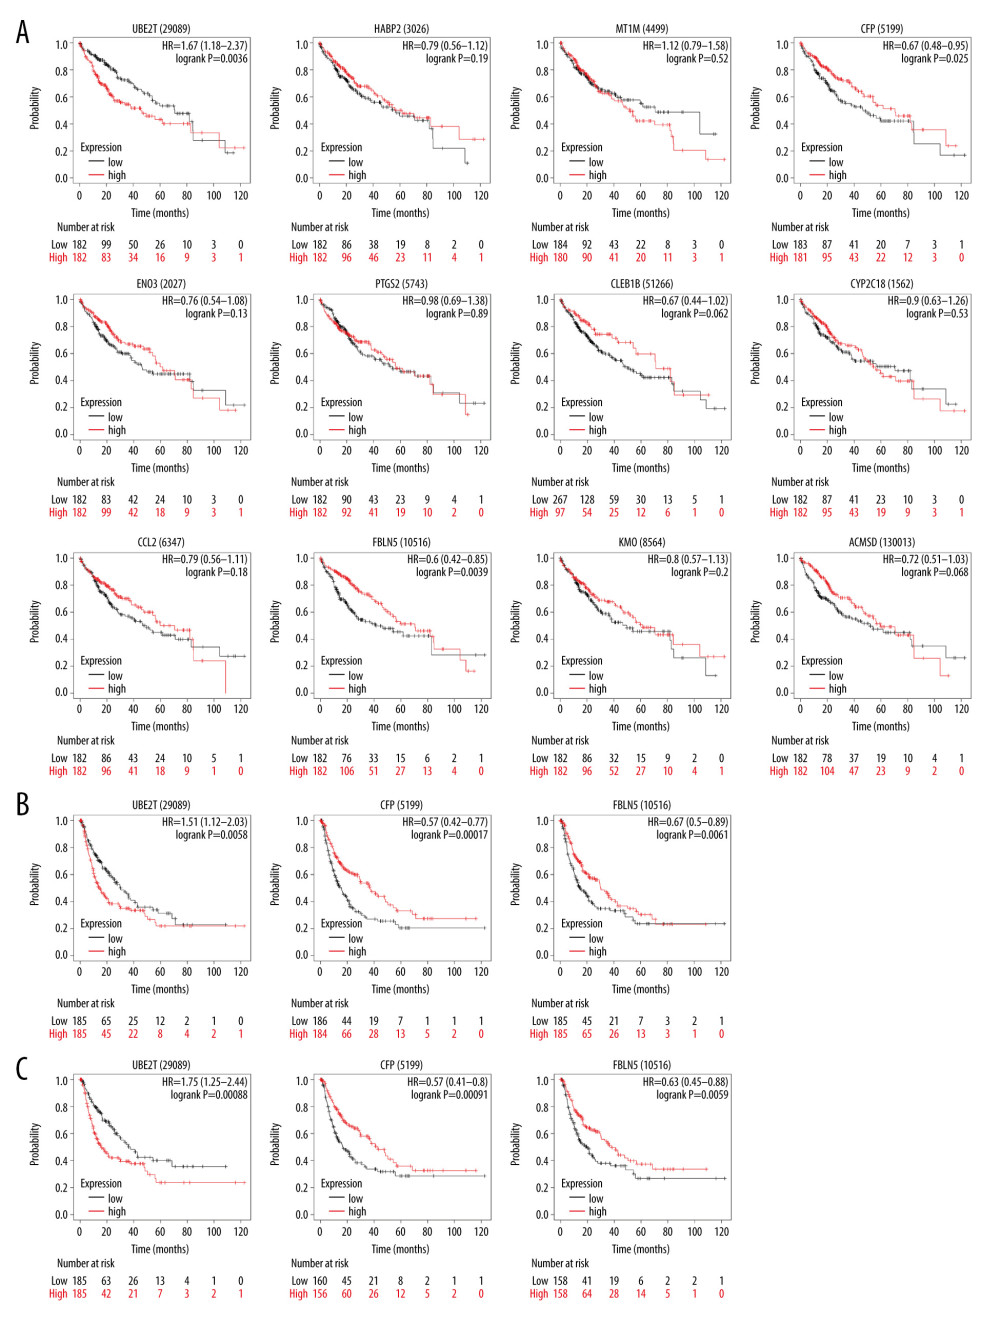 The survival analysis chart was drawn by the Kaplan-Meier plotter online tool; P<0.01 was considered statistically significant. (A) Overall survival curve analysis of key genes. (B) Progression-free survival curve analysis of UBE2T, CFP, and FBLN5. (C) Relapse-free survival curve analysis of UBE2T, CFP, and FBLN5.